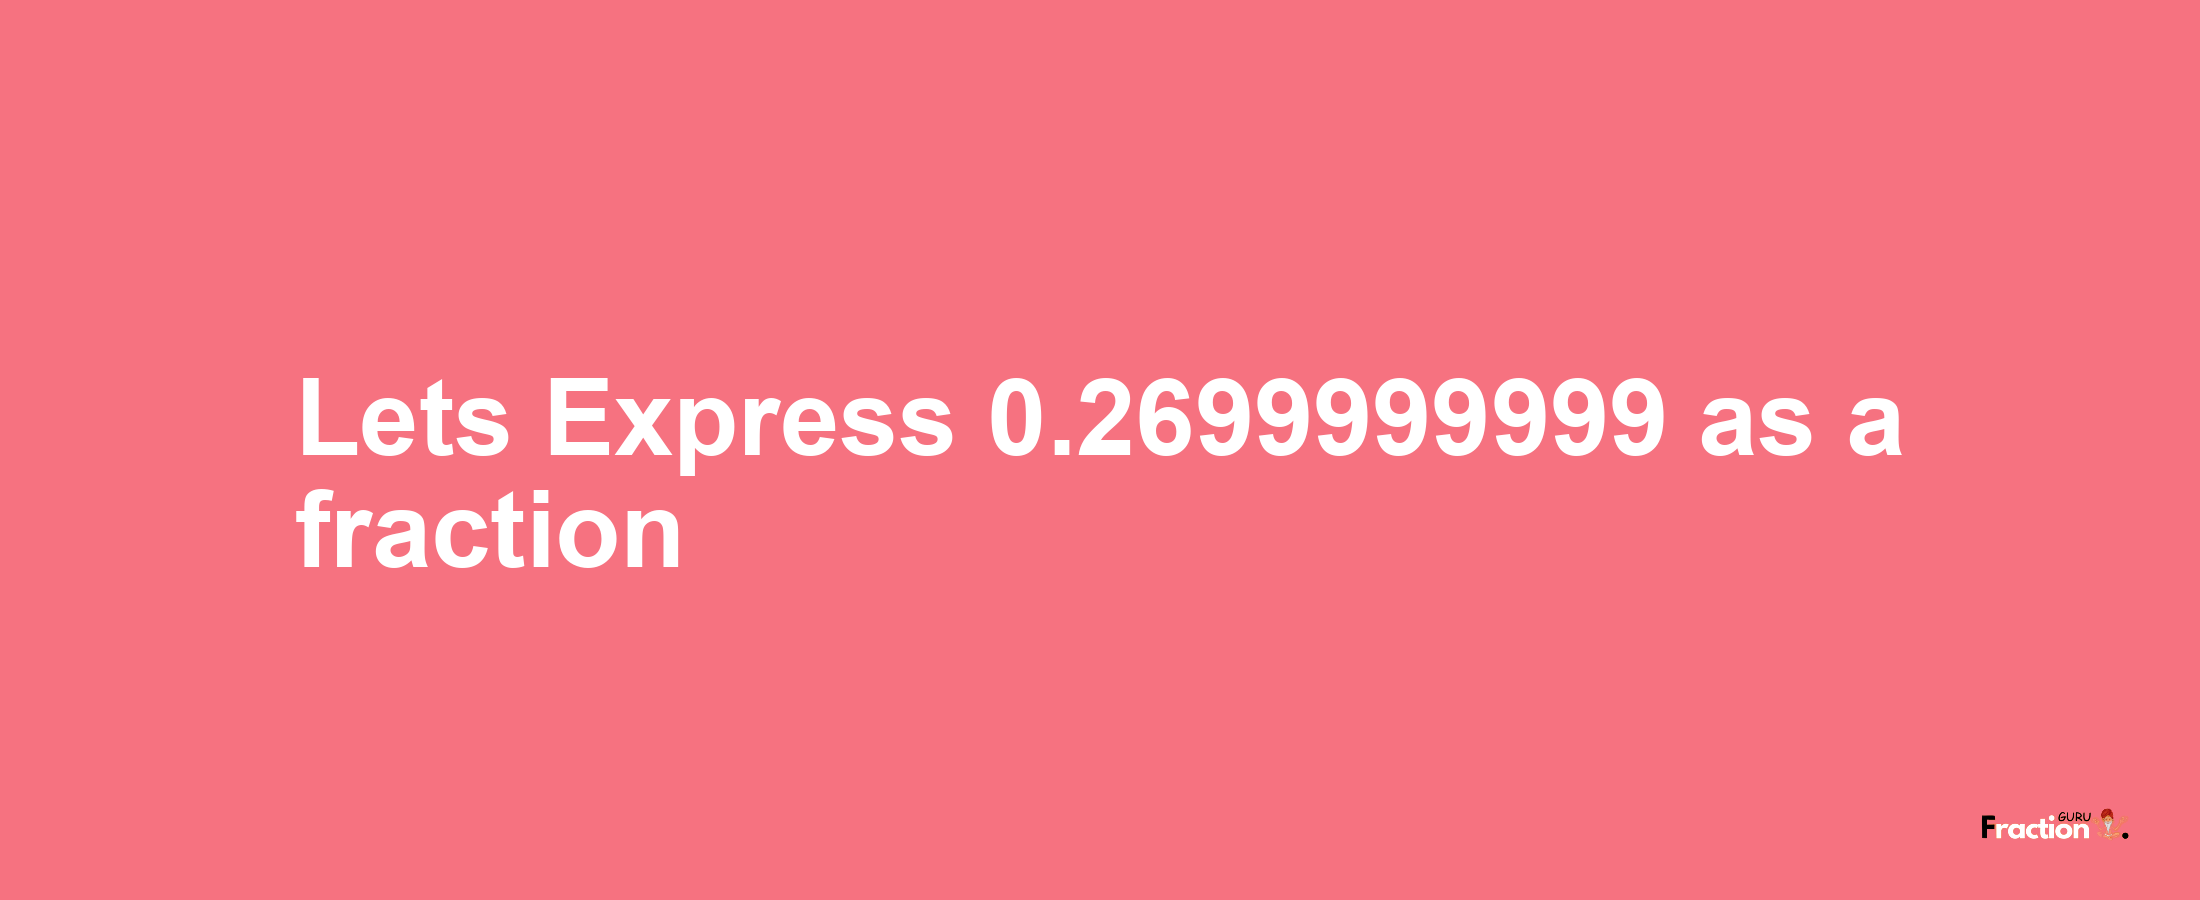 Lets Express 0.2699999999 as afraction